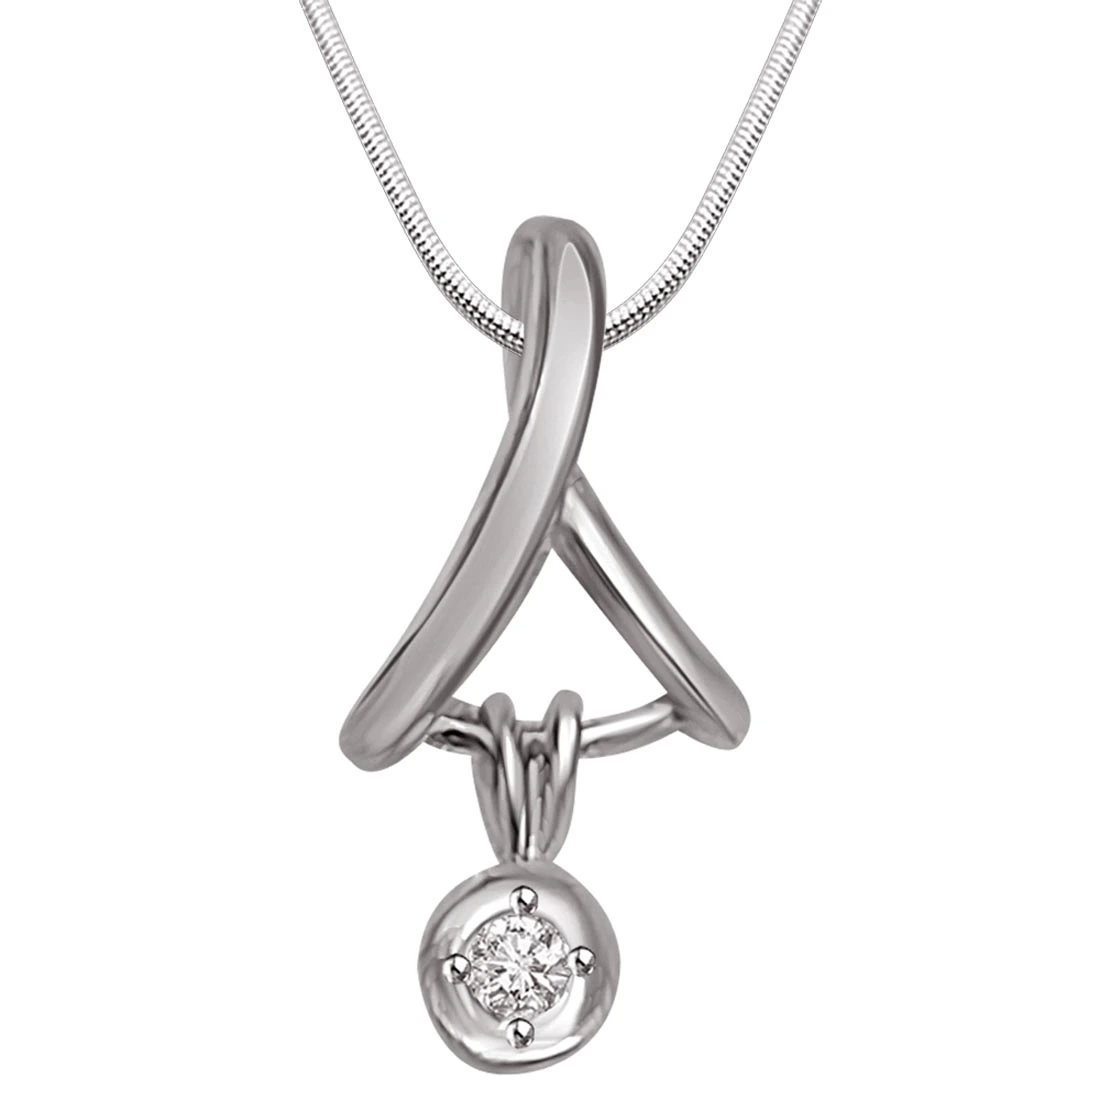 Royal Fantasy - Real Diamond & Sterling Silver Pendant with 18 IN Chain (SDP193)